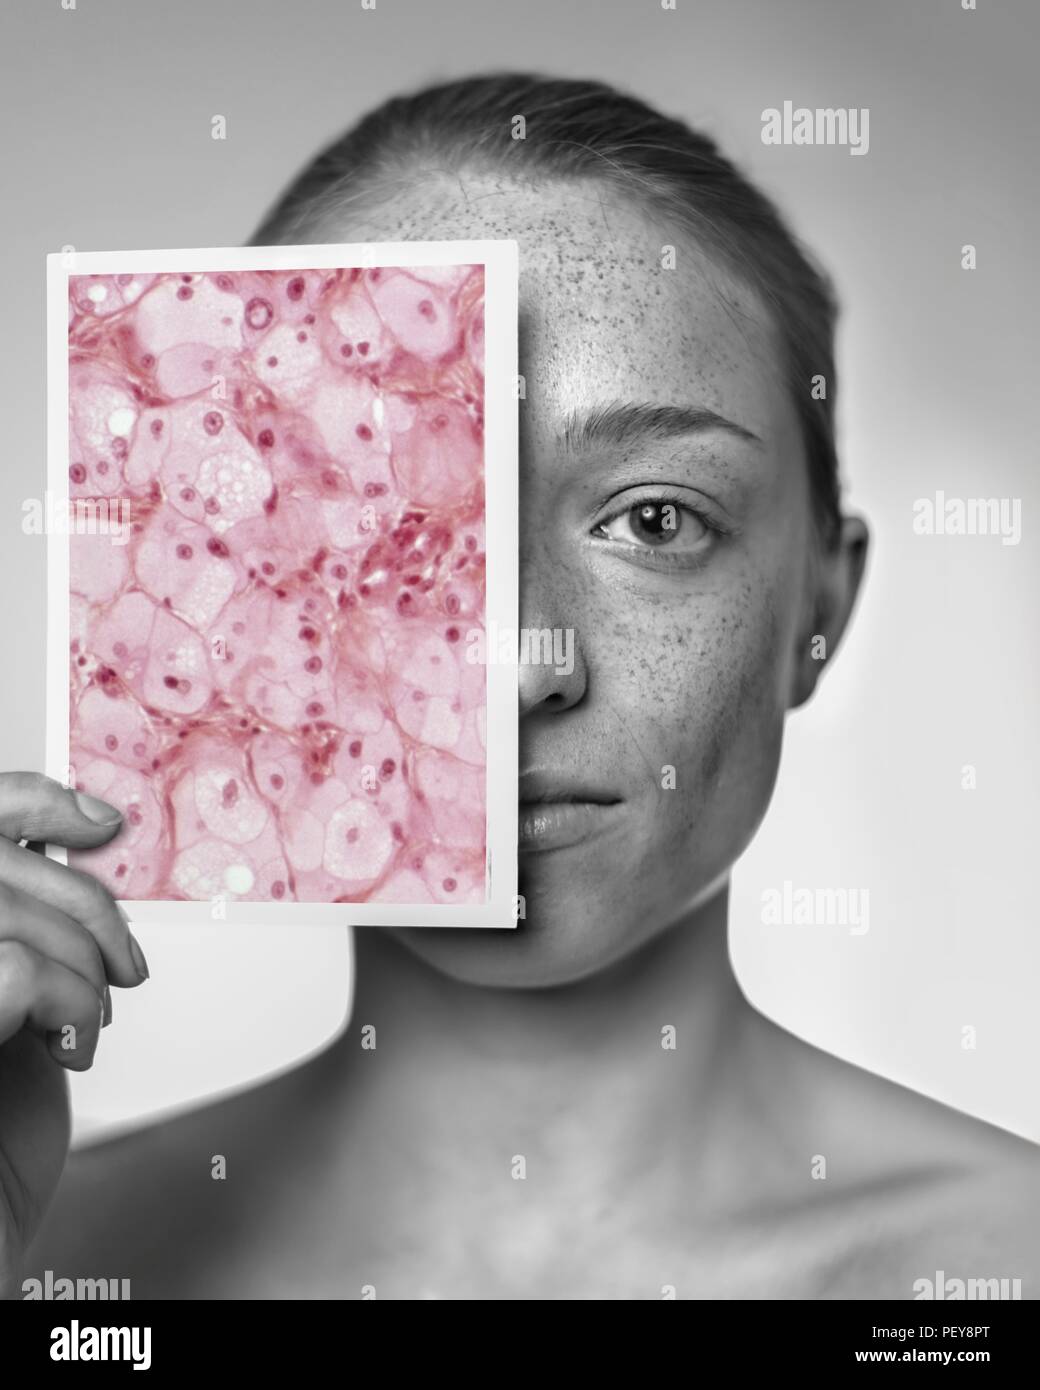 Sun damage. Woman holding a light micrograph in front of her face showing the damage sun exposure has done to her skin. Stock Photo